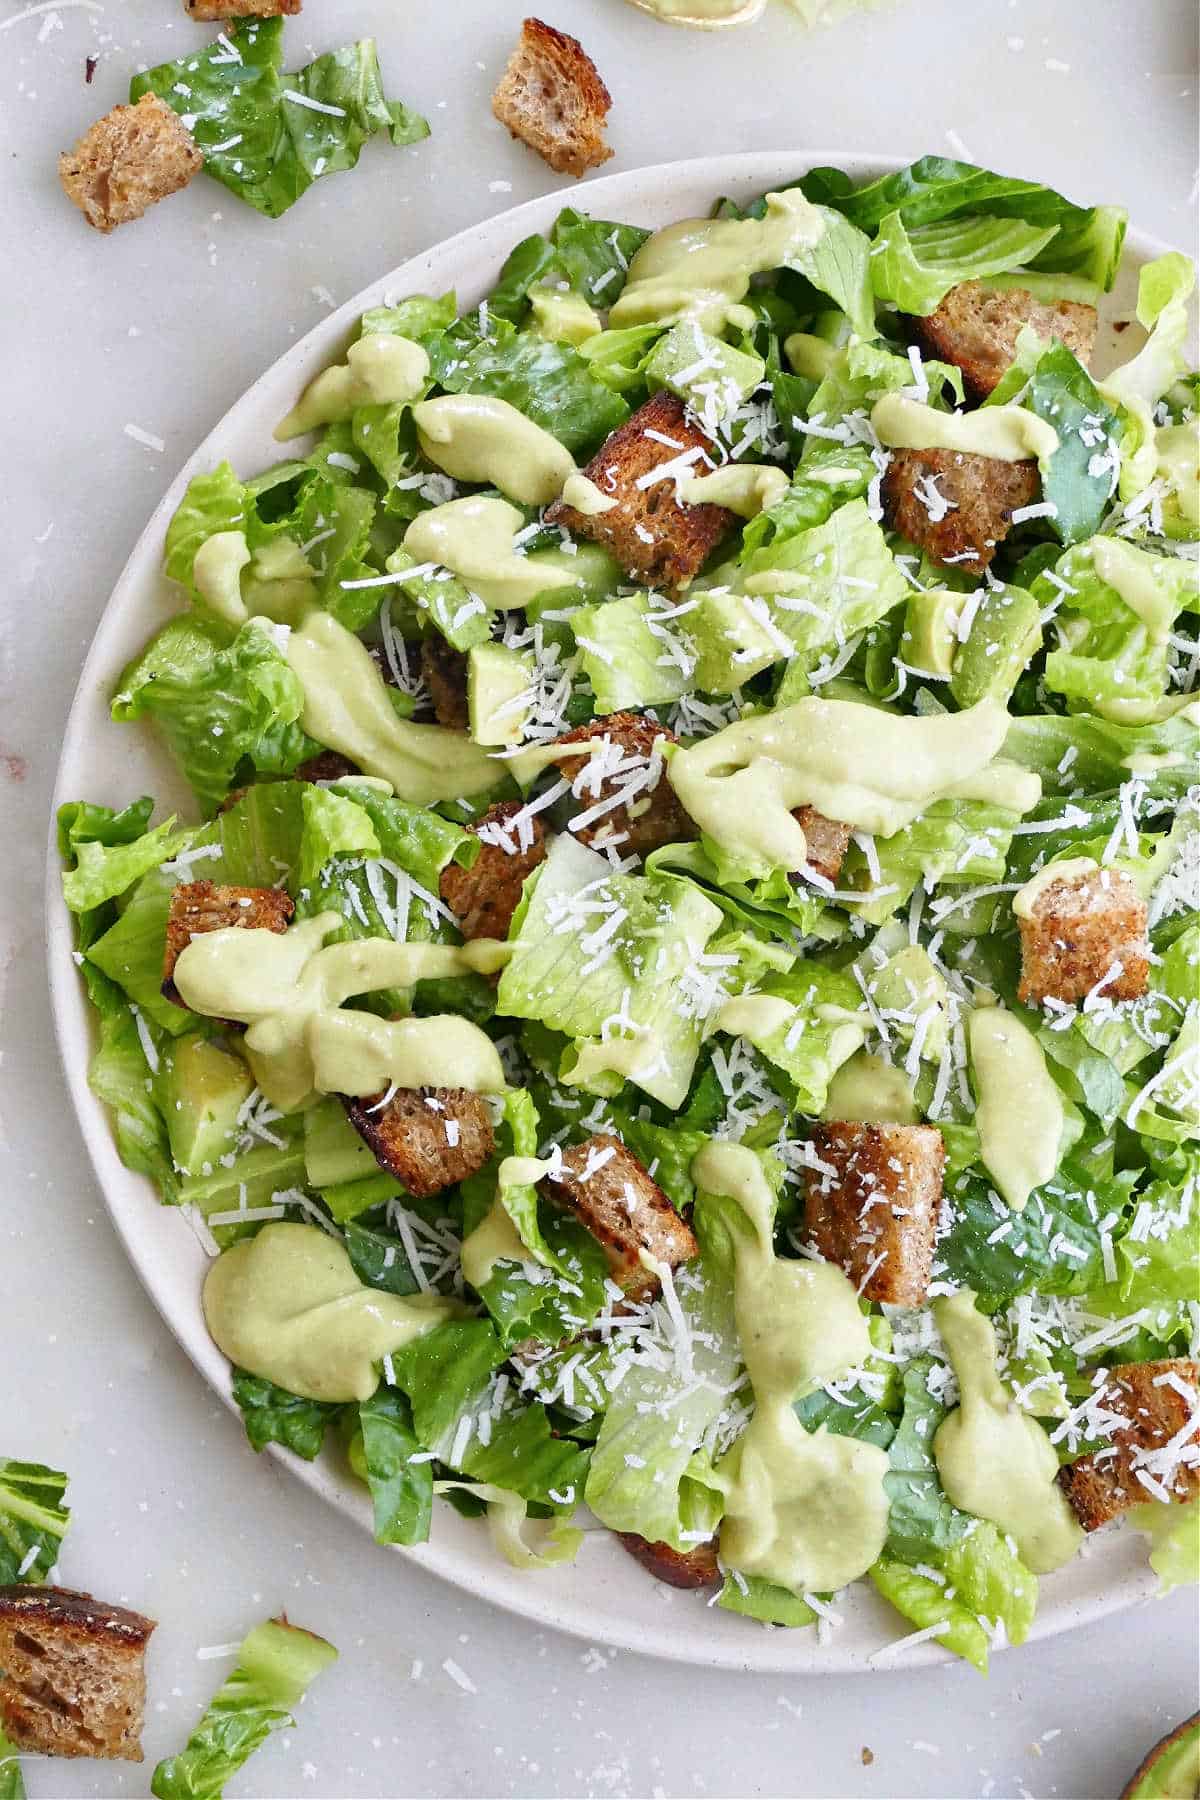 Caesar salad with avocado dressing and croutons on a plate